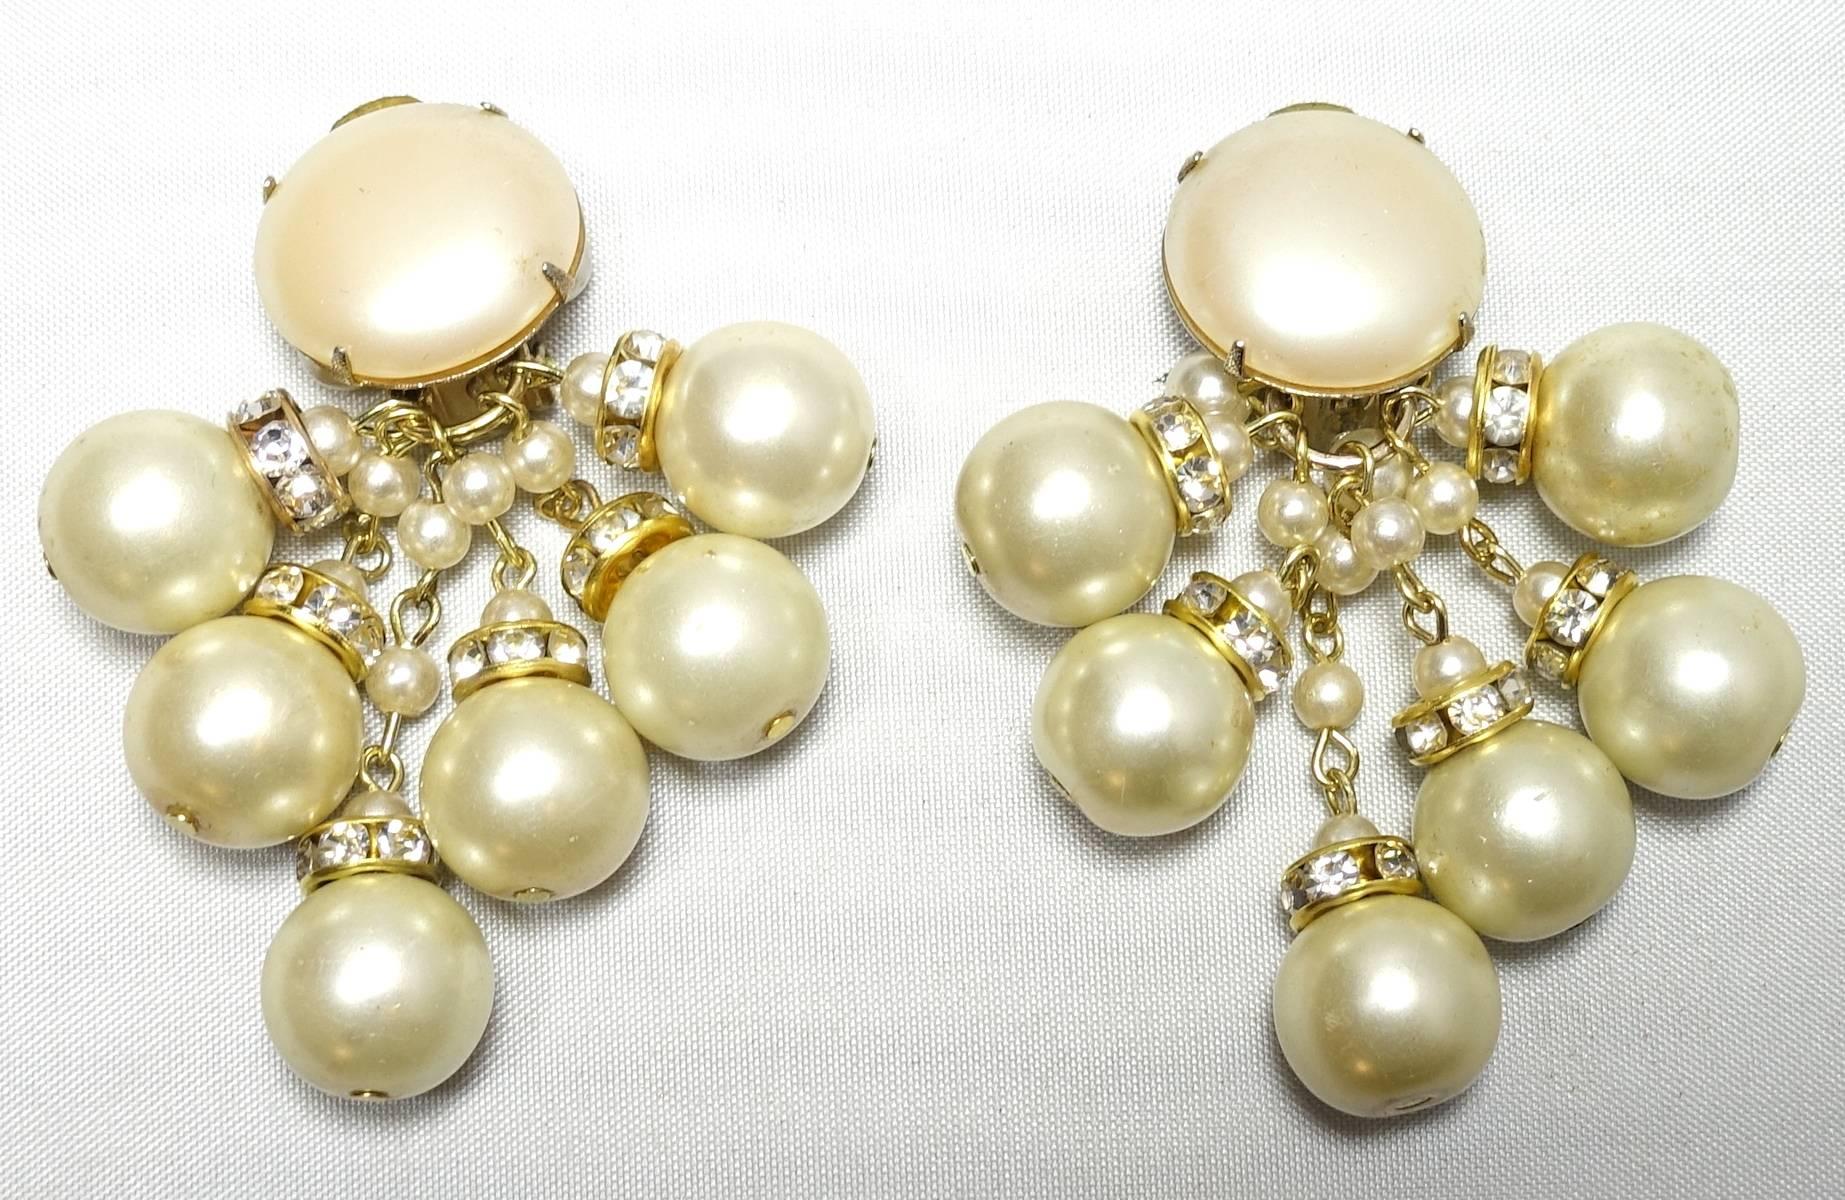 These vintage signed DeMario earrings feature faux pearls with crystal rhondells in a gold tone setting.  these clip earrings measure 2” x 1” and are signed “DeMario”. They are in excellent condition.